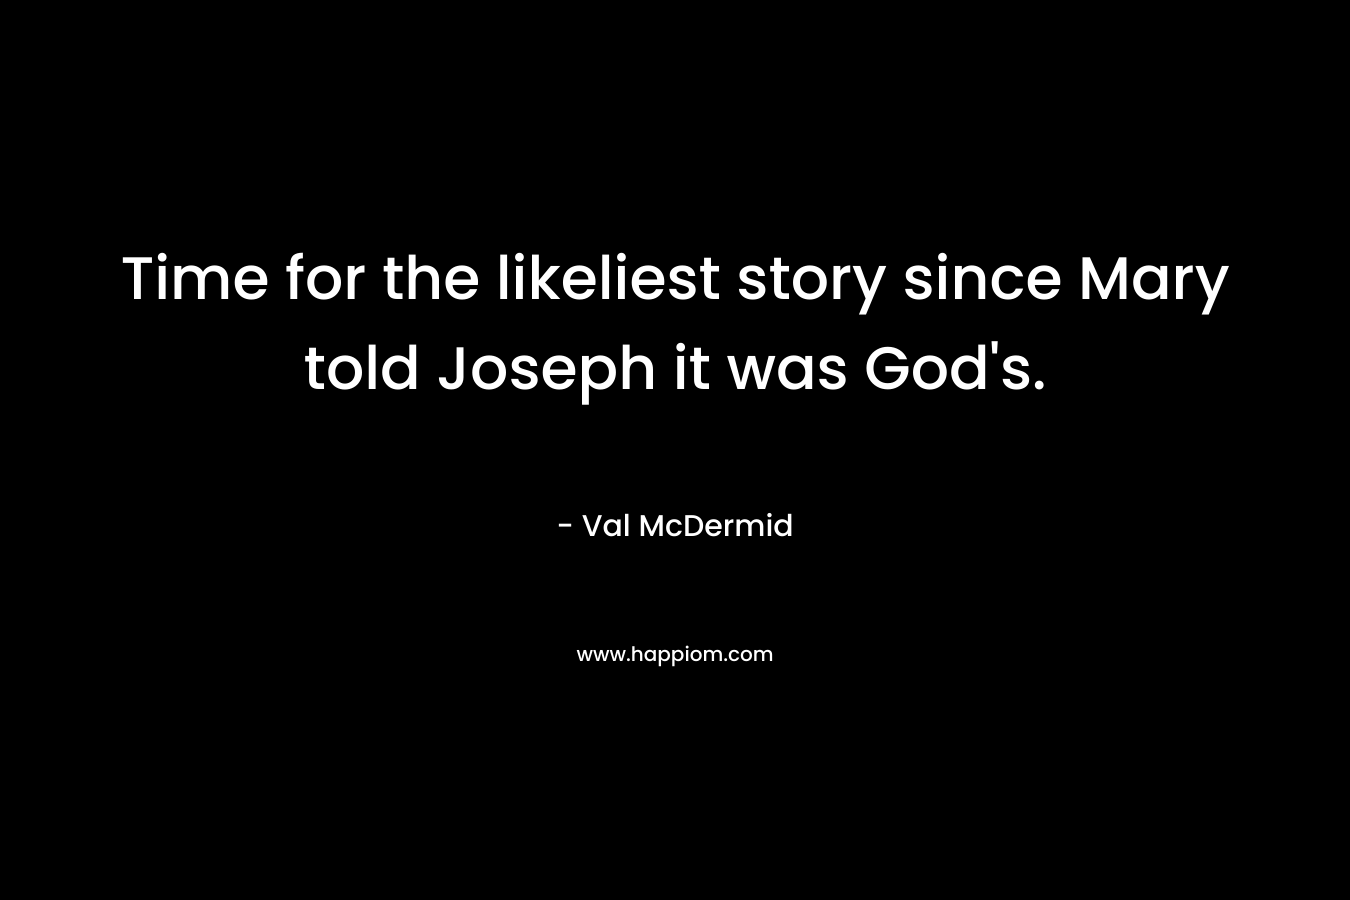 Time for the likeliest story since Mary told Joseph it was God’s. – Val McDermid